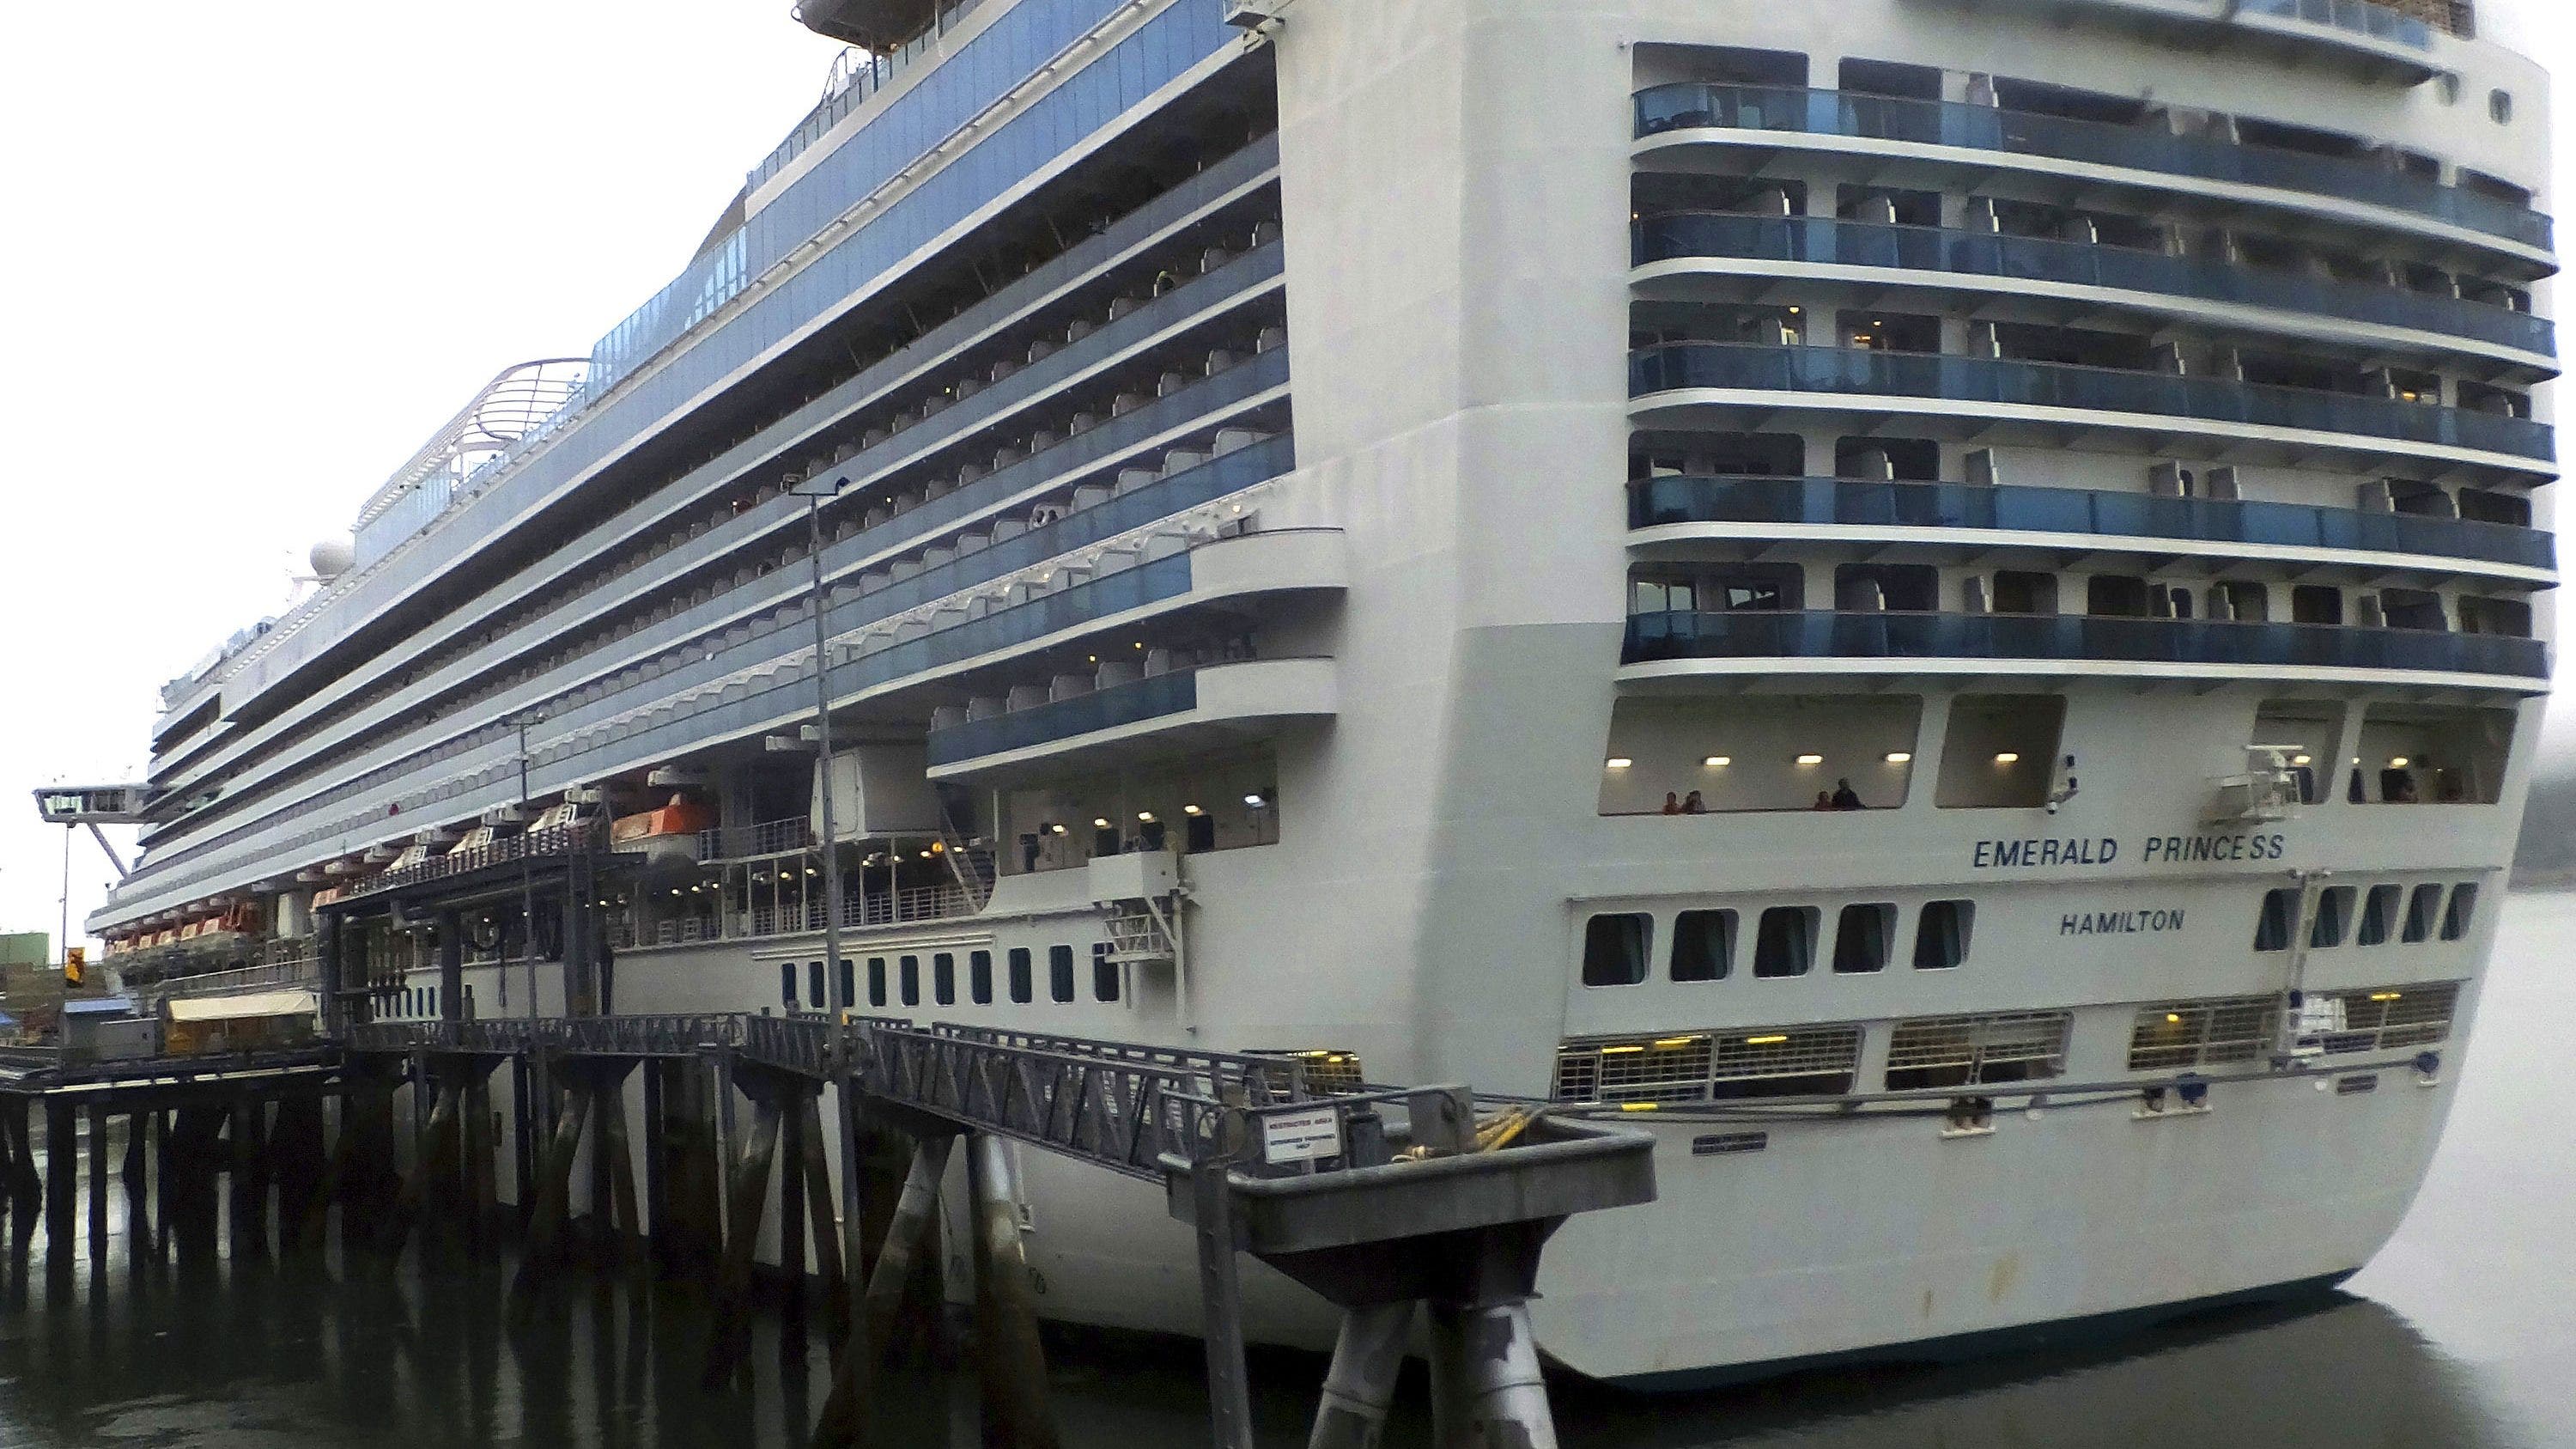 Teen dies after falling overboard from cruise ship returning to Miami